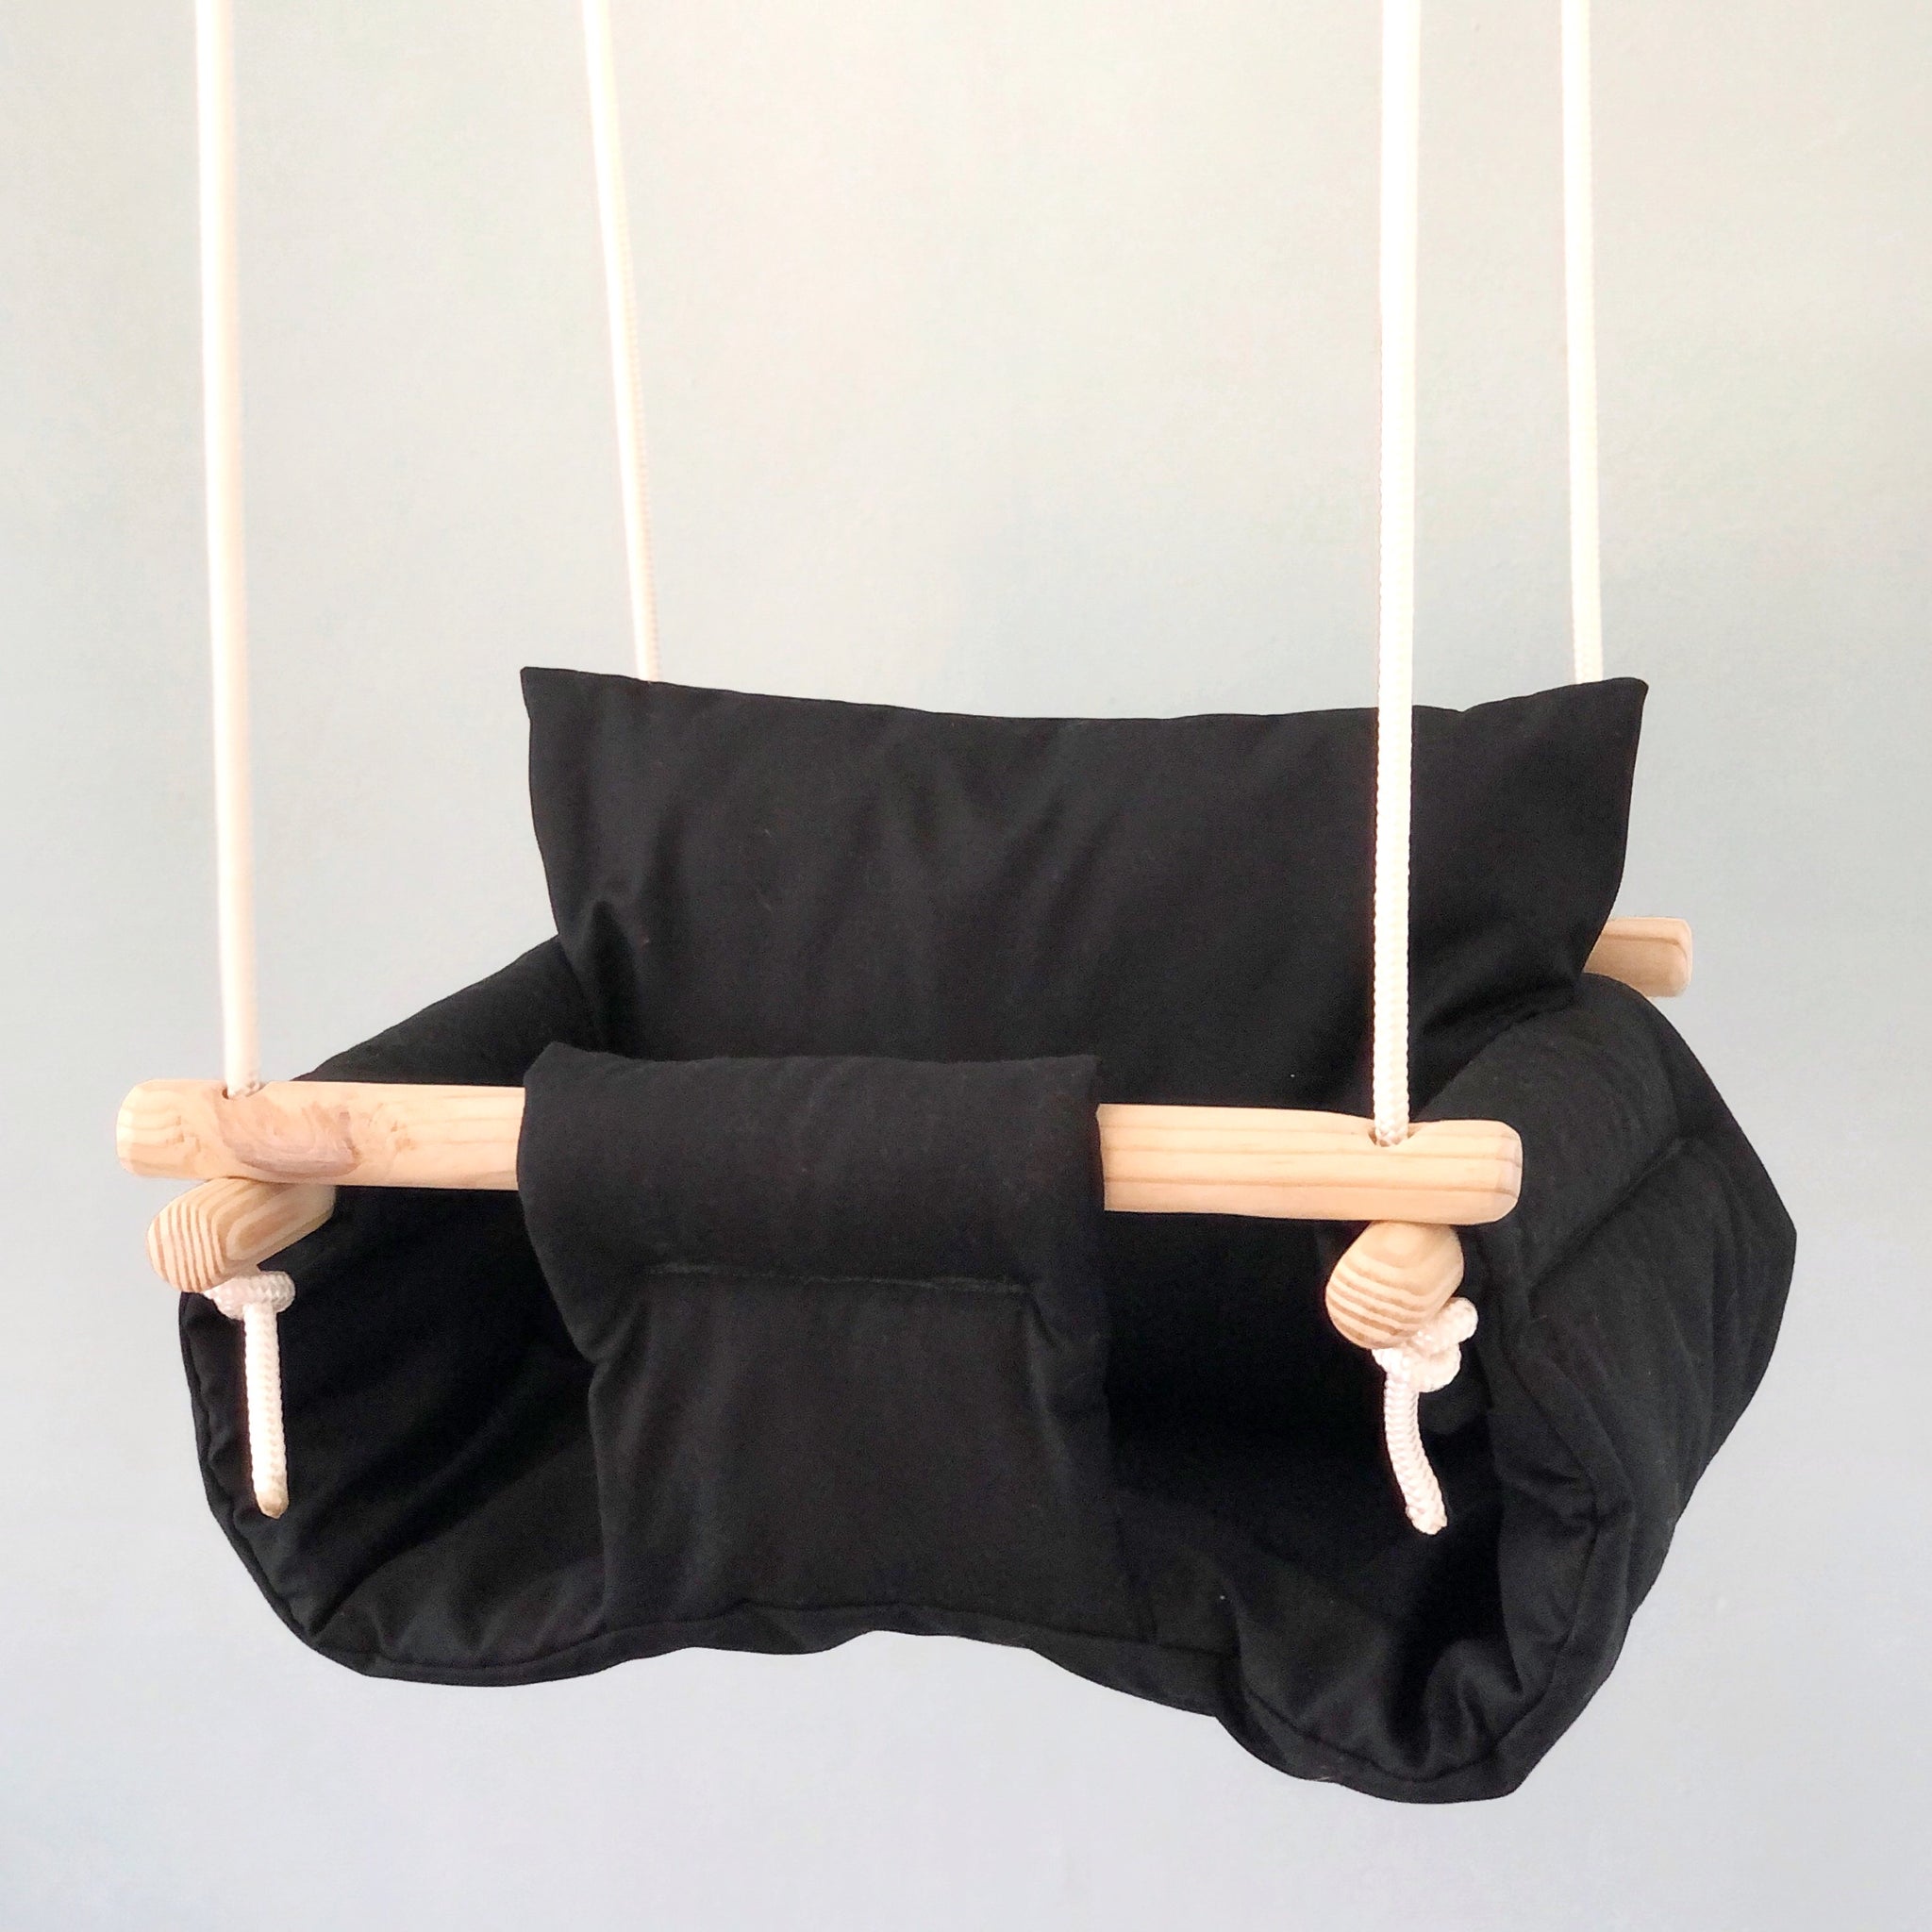 Baby and Toddler Hanging Swing